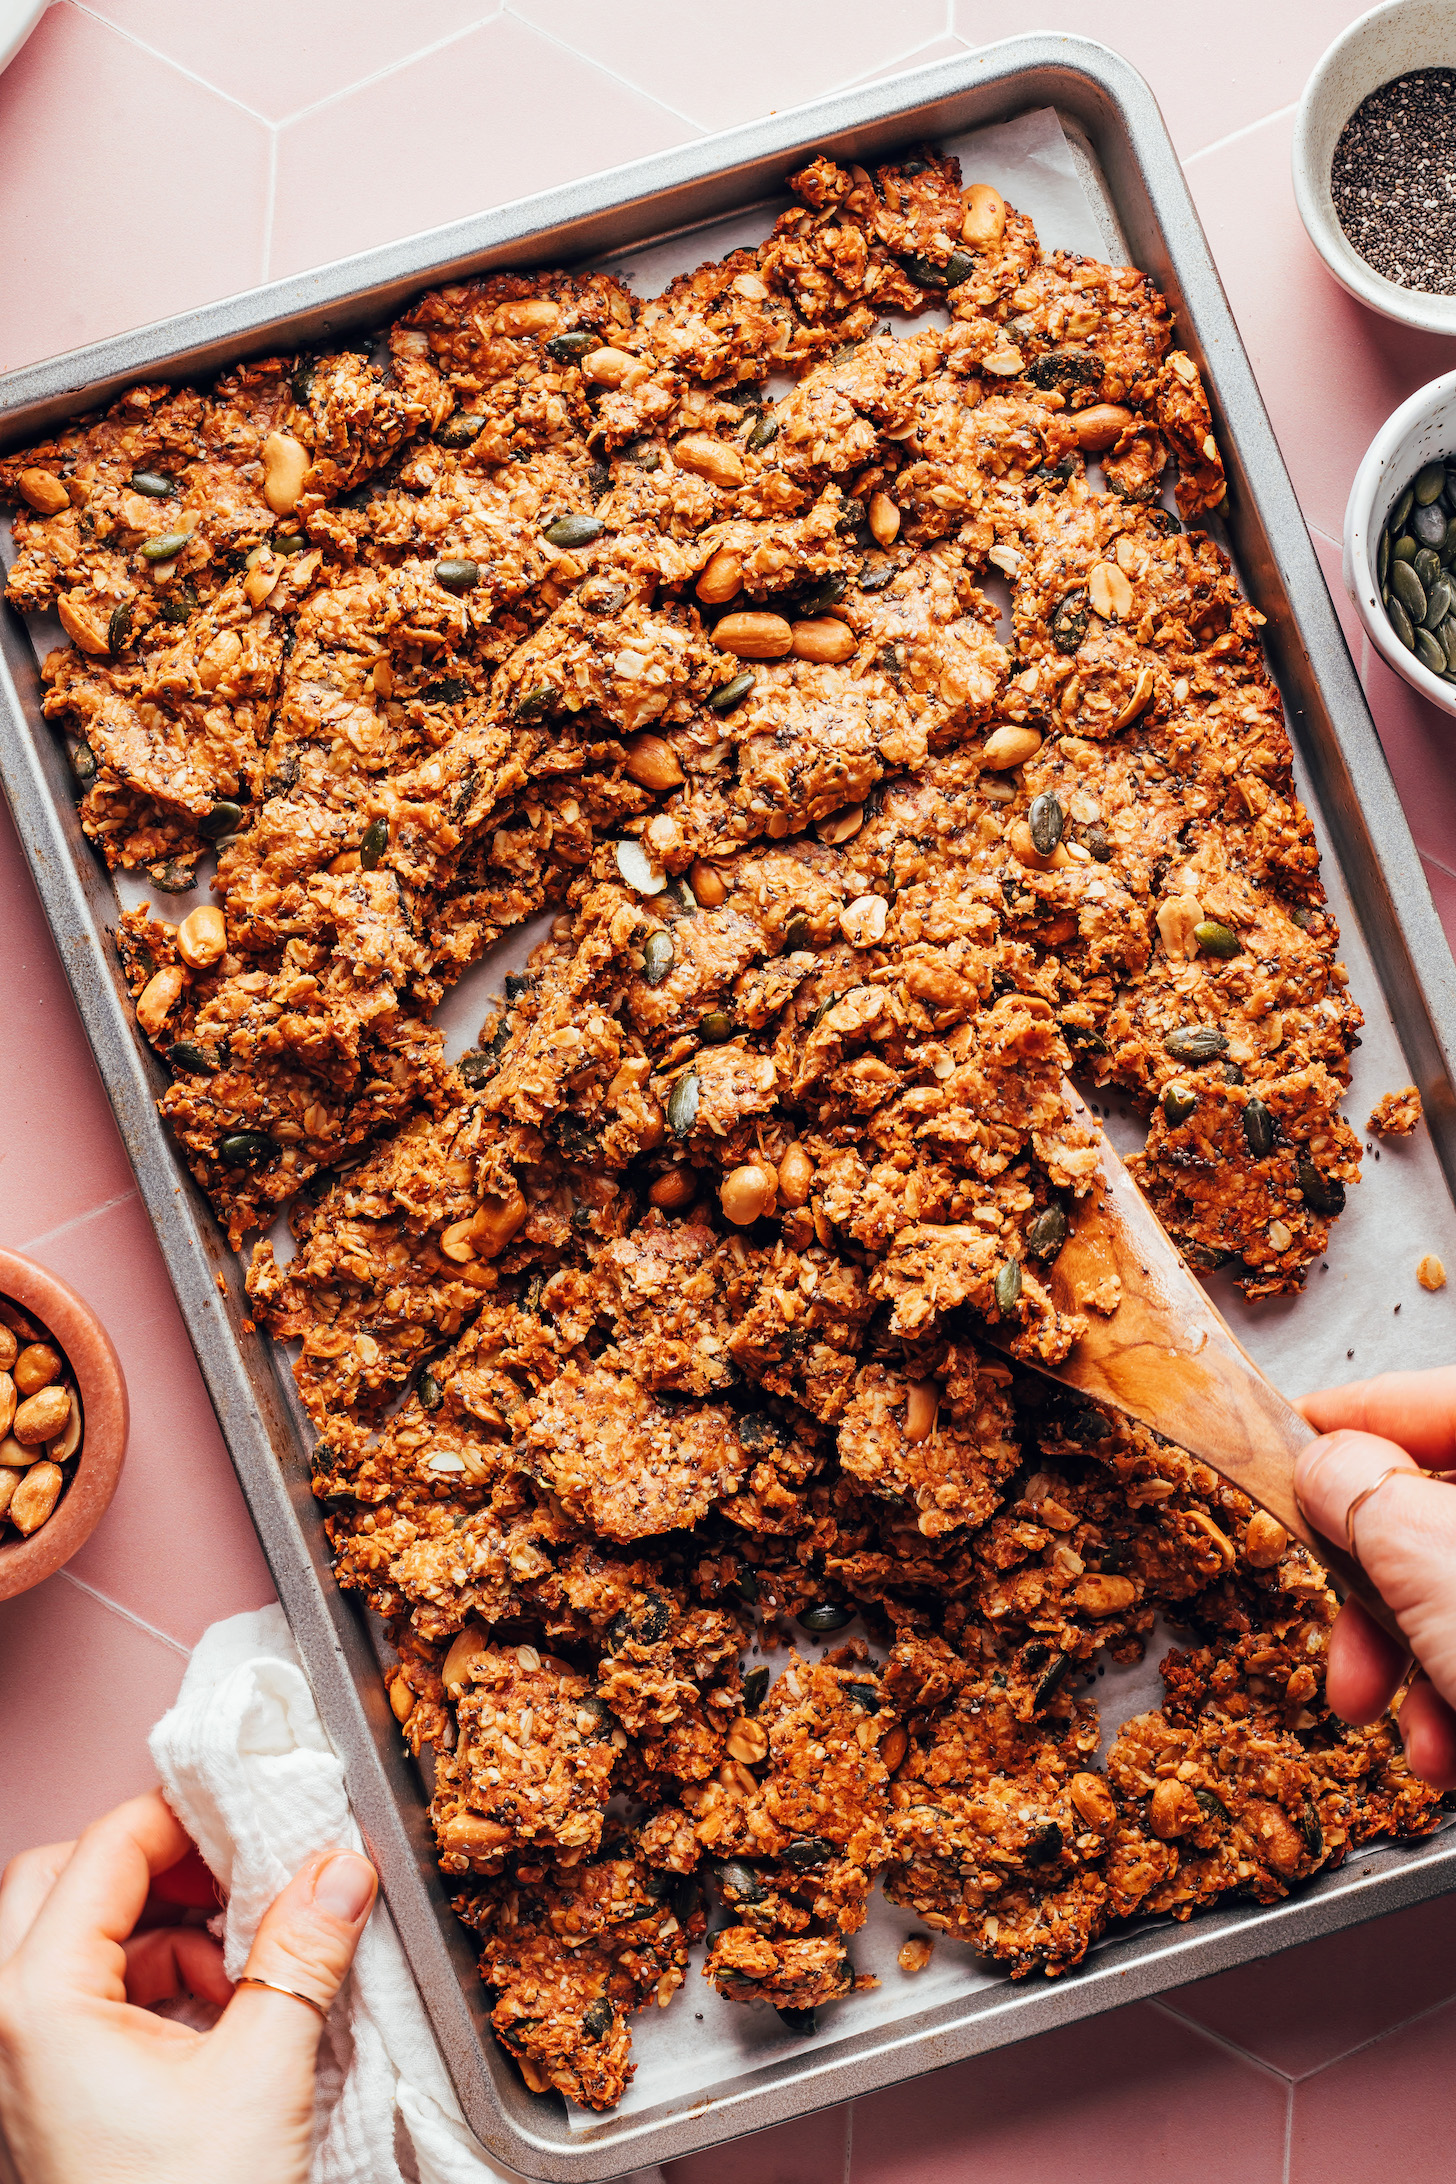 Breaking up peanut butter cookie granola into chunks on a baking sheet